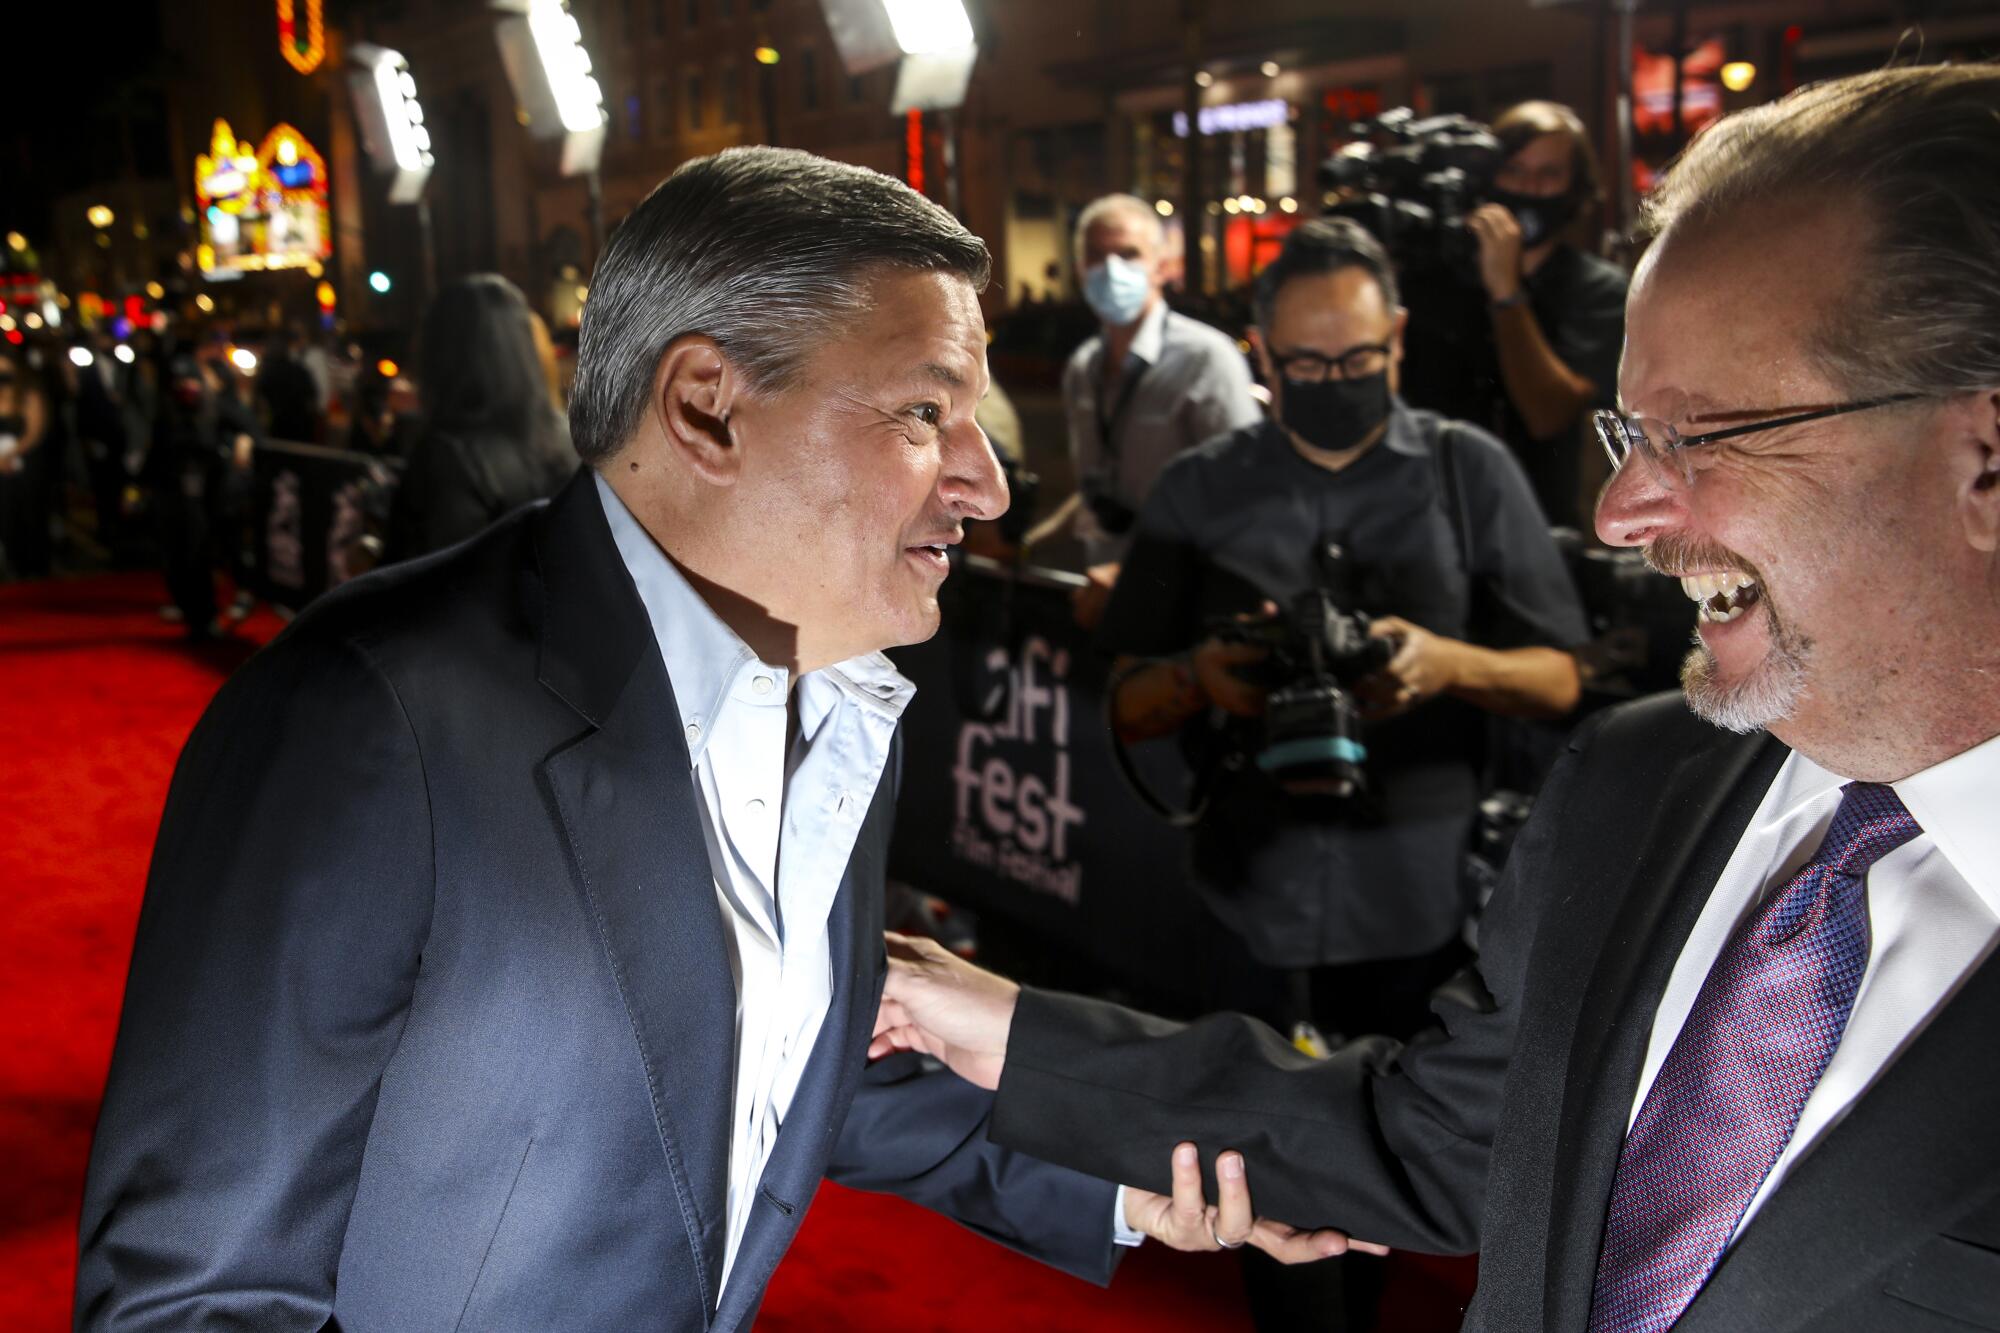  Ted Sarandos and Bob Gazalle on the red carpet.